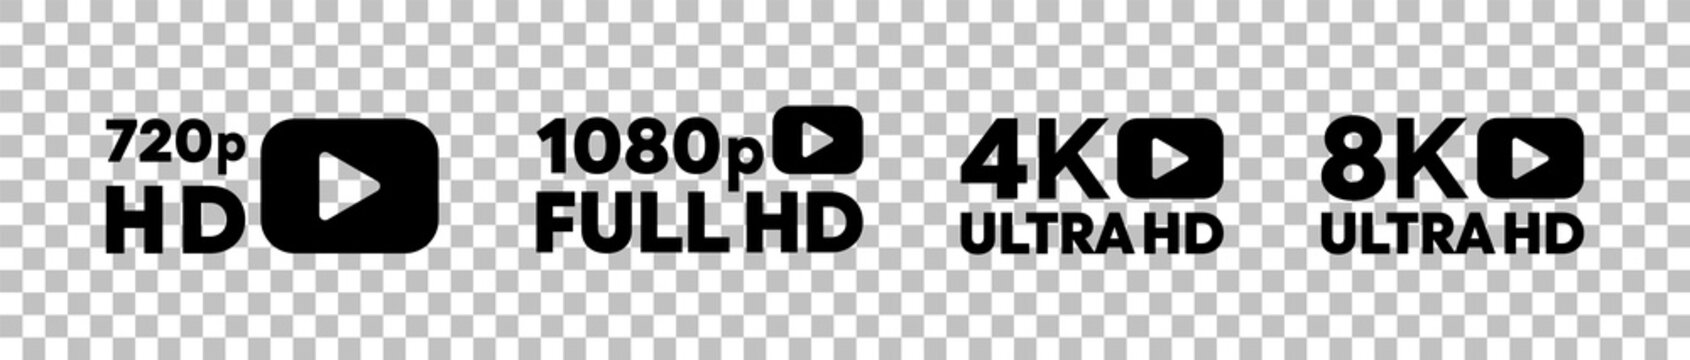 Video resolution icon set. 720p hd, 1080p full hd, 4k ultra hd and 8k ultra hd. Vector illustration